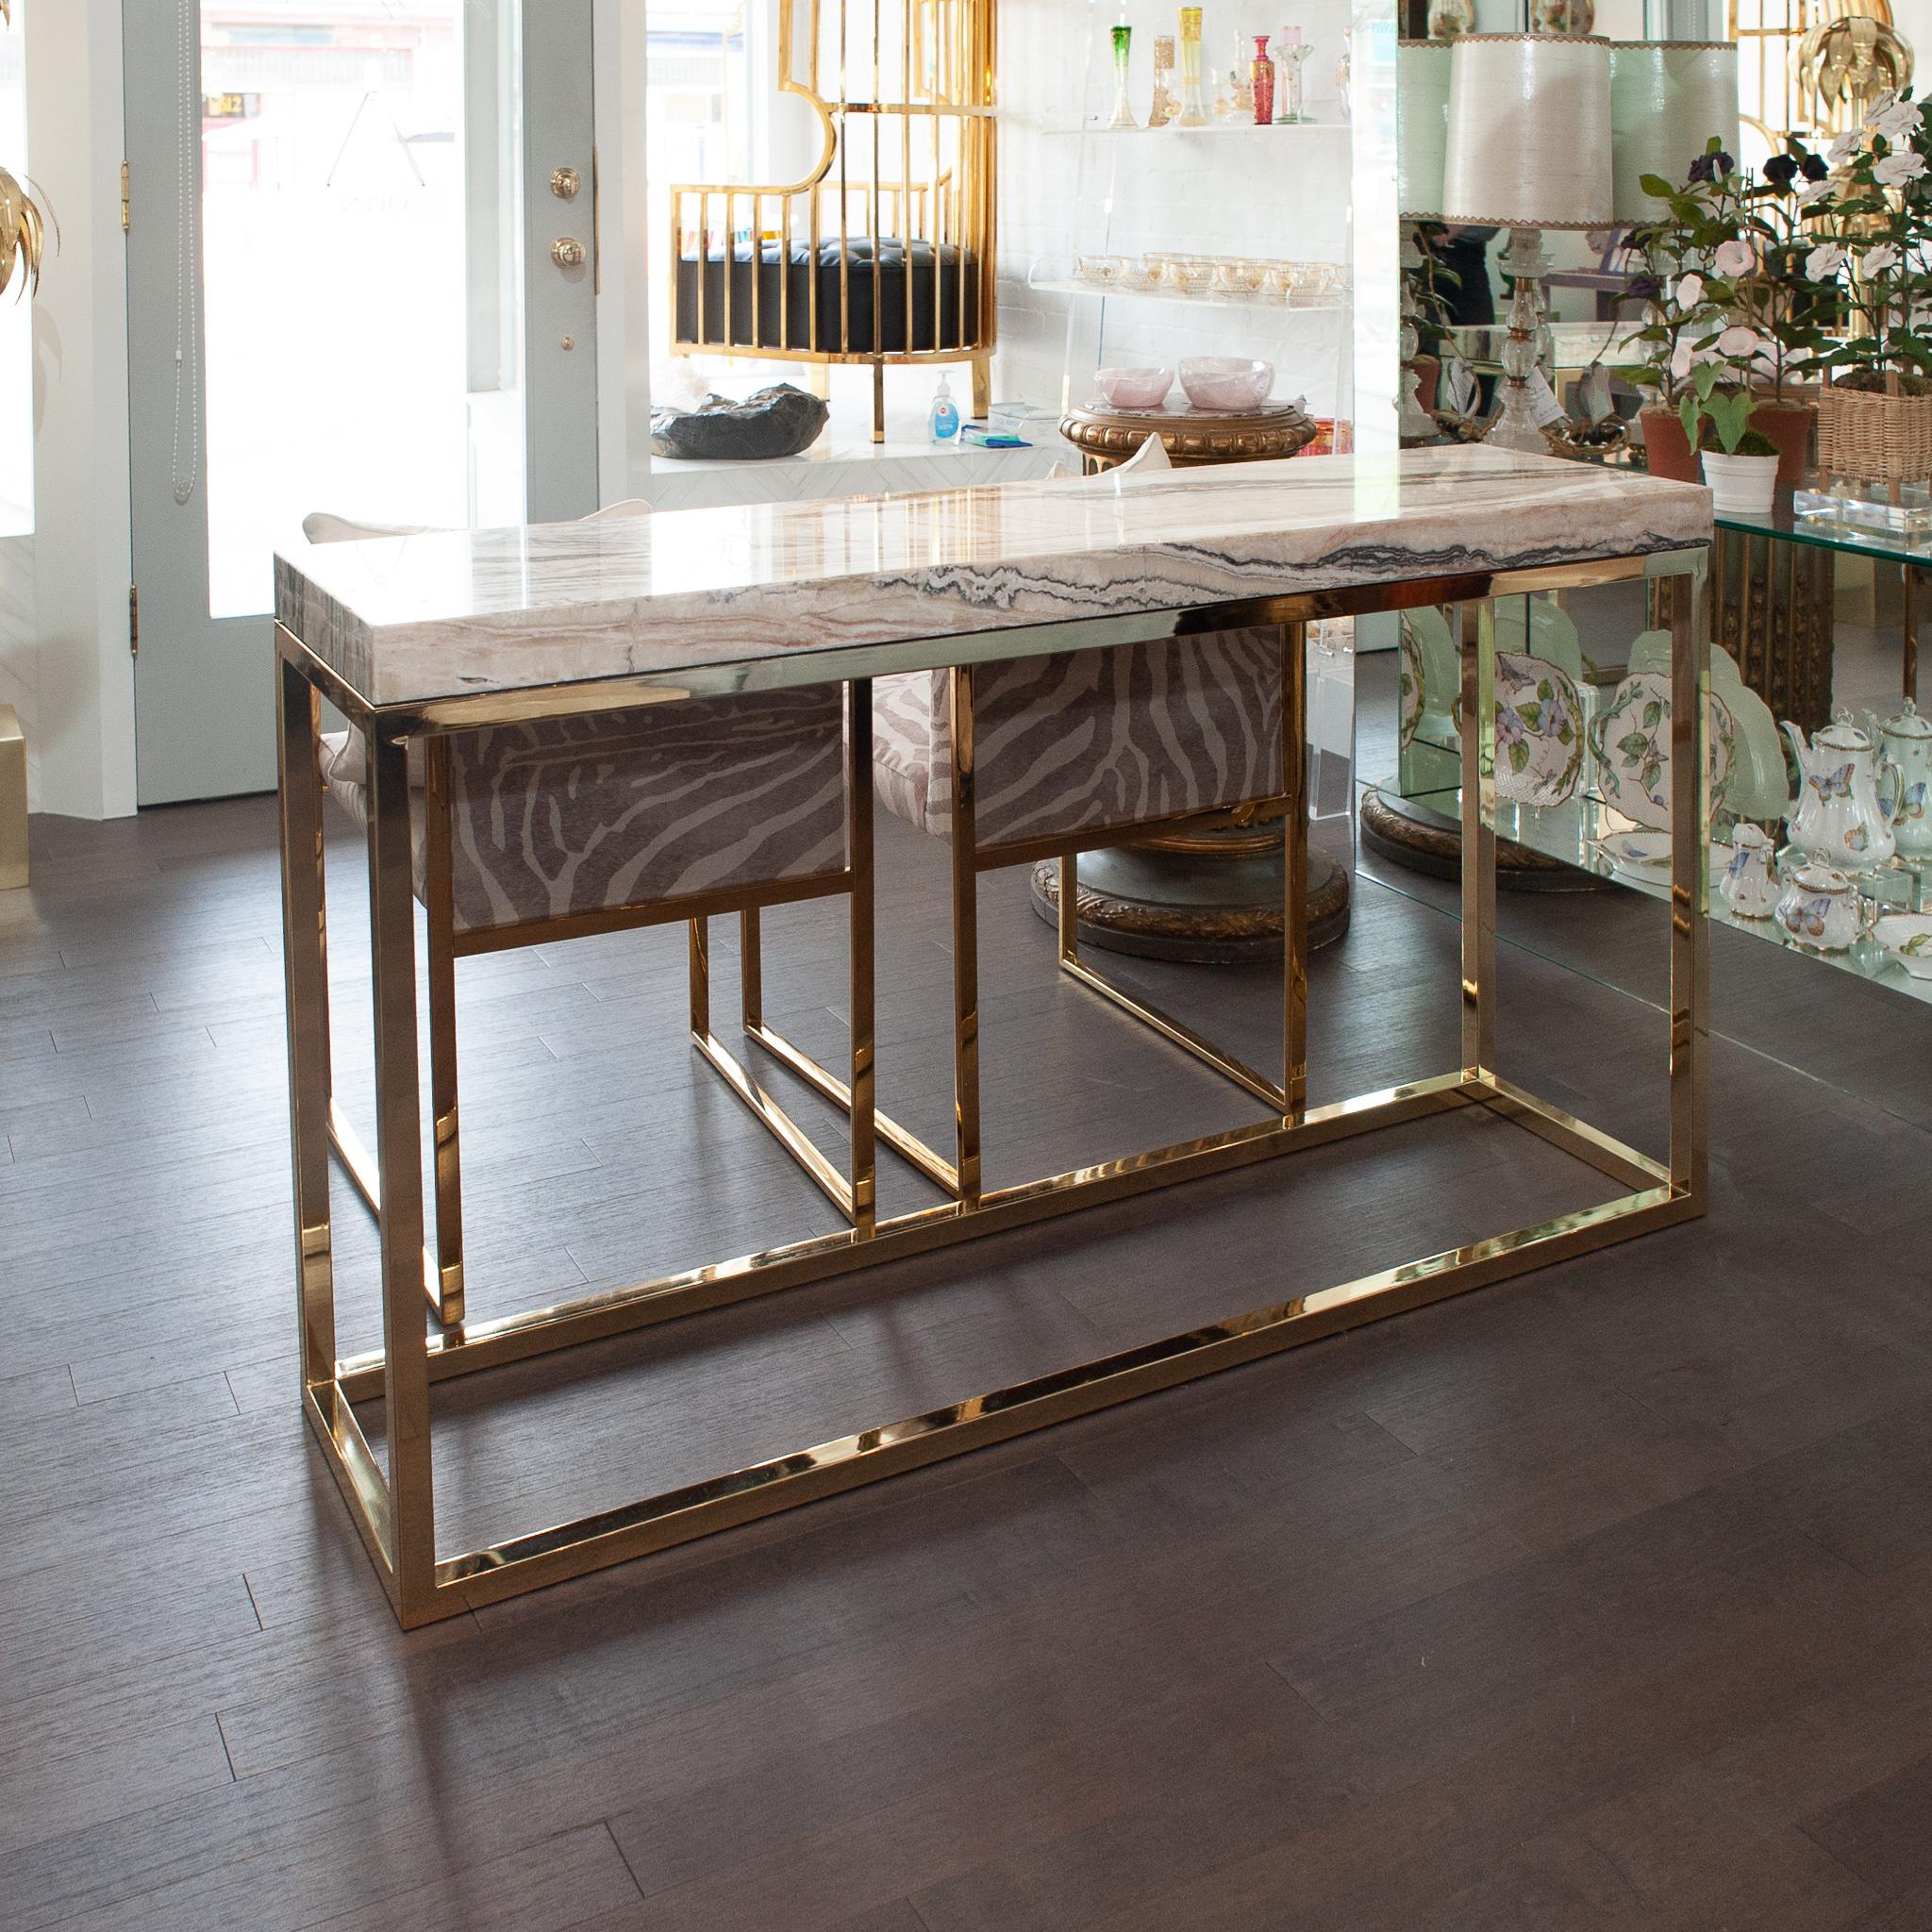 A gorgeous console table with polished brass base and thick onyx top. The perfect entryway piece with a Mid Century Modern flair. The combination of polished brass and natural onyx stone is always timeless and chic.